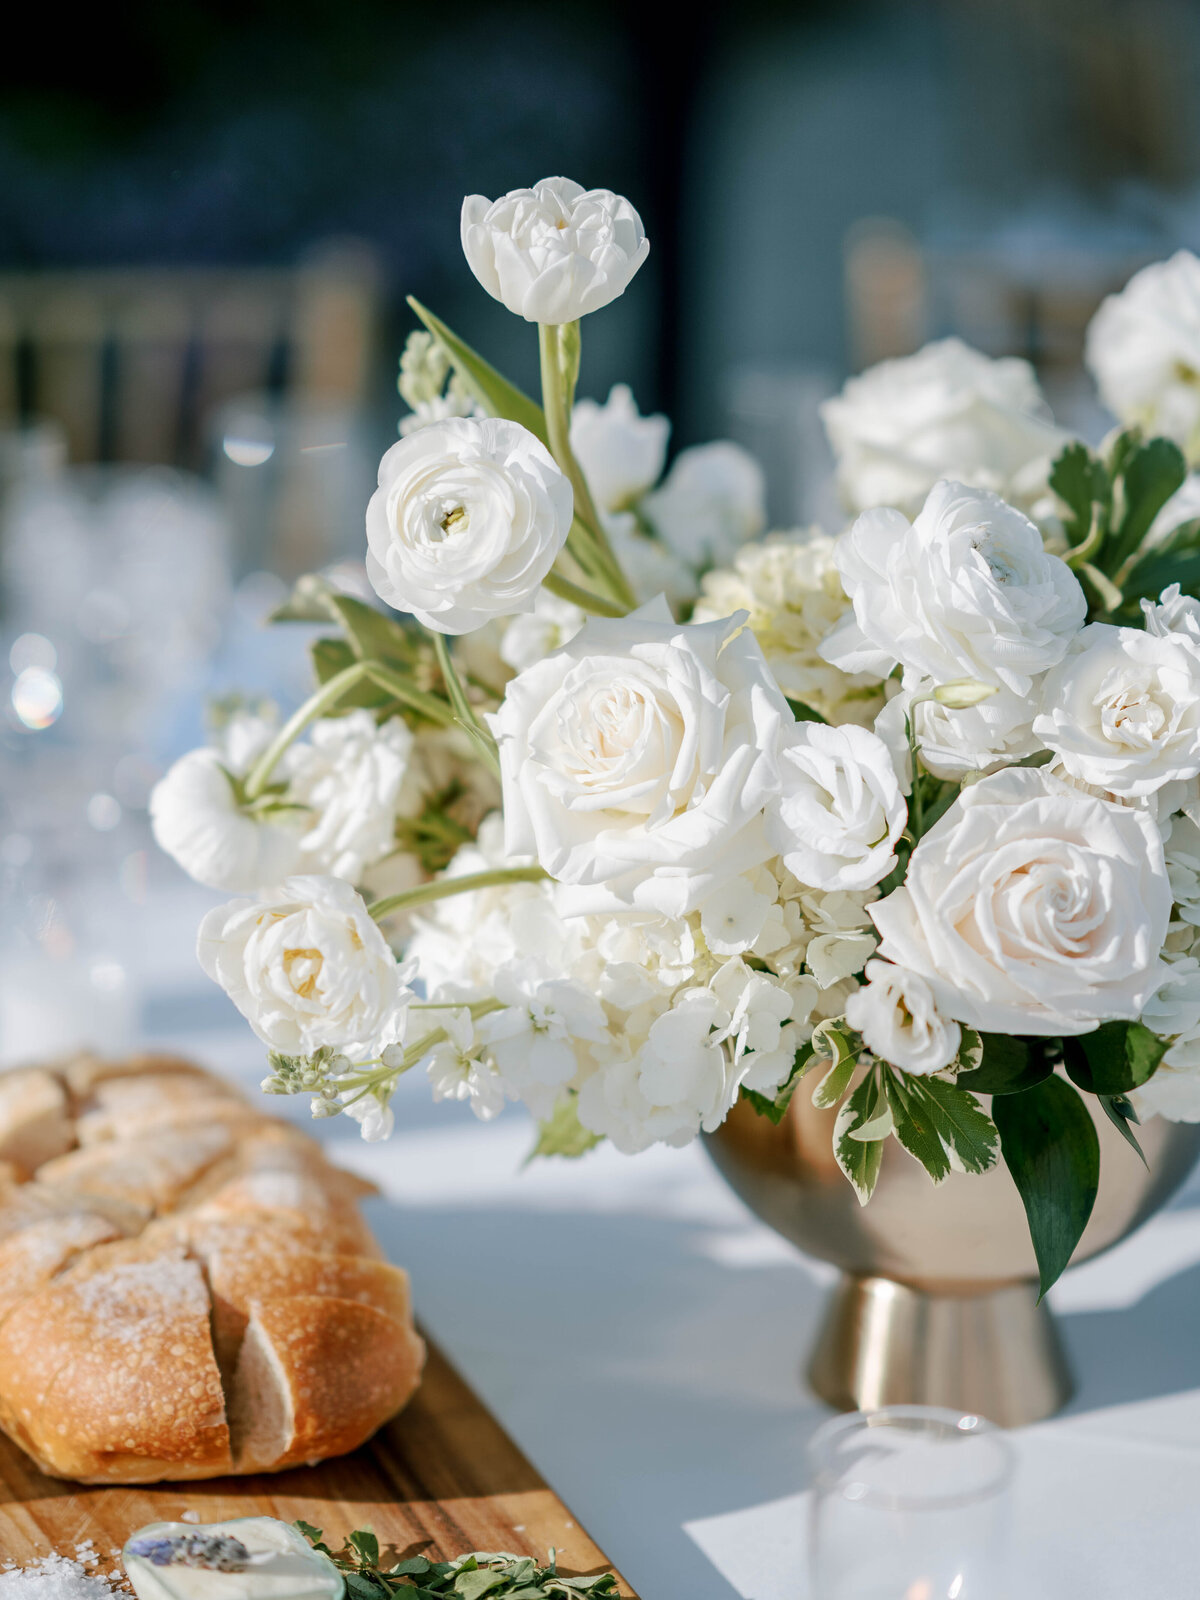 This elegant white bouquet sits in a gold vessel next to hour d'ouvres